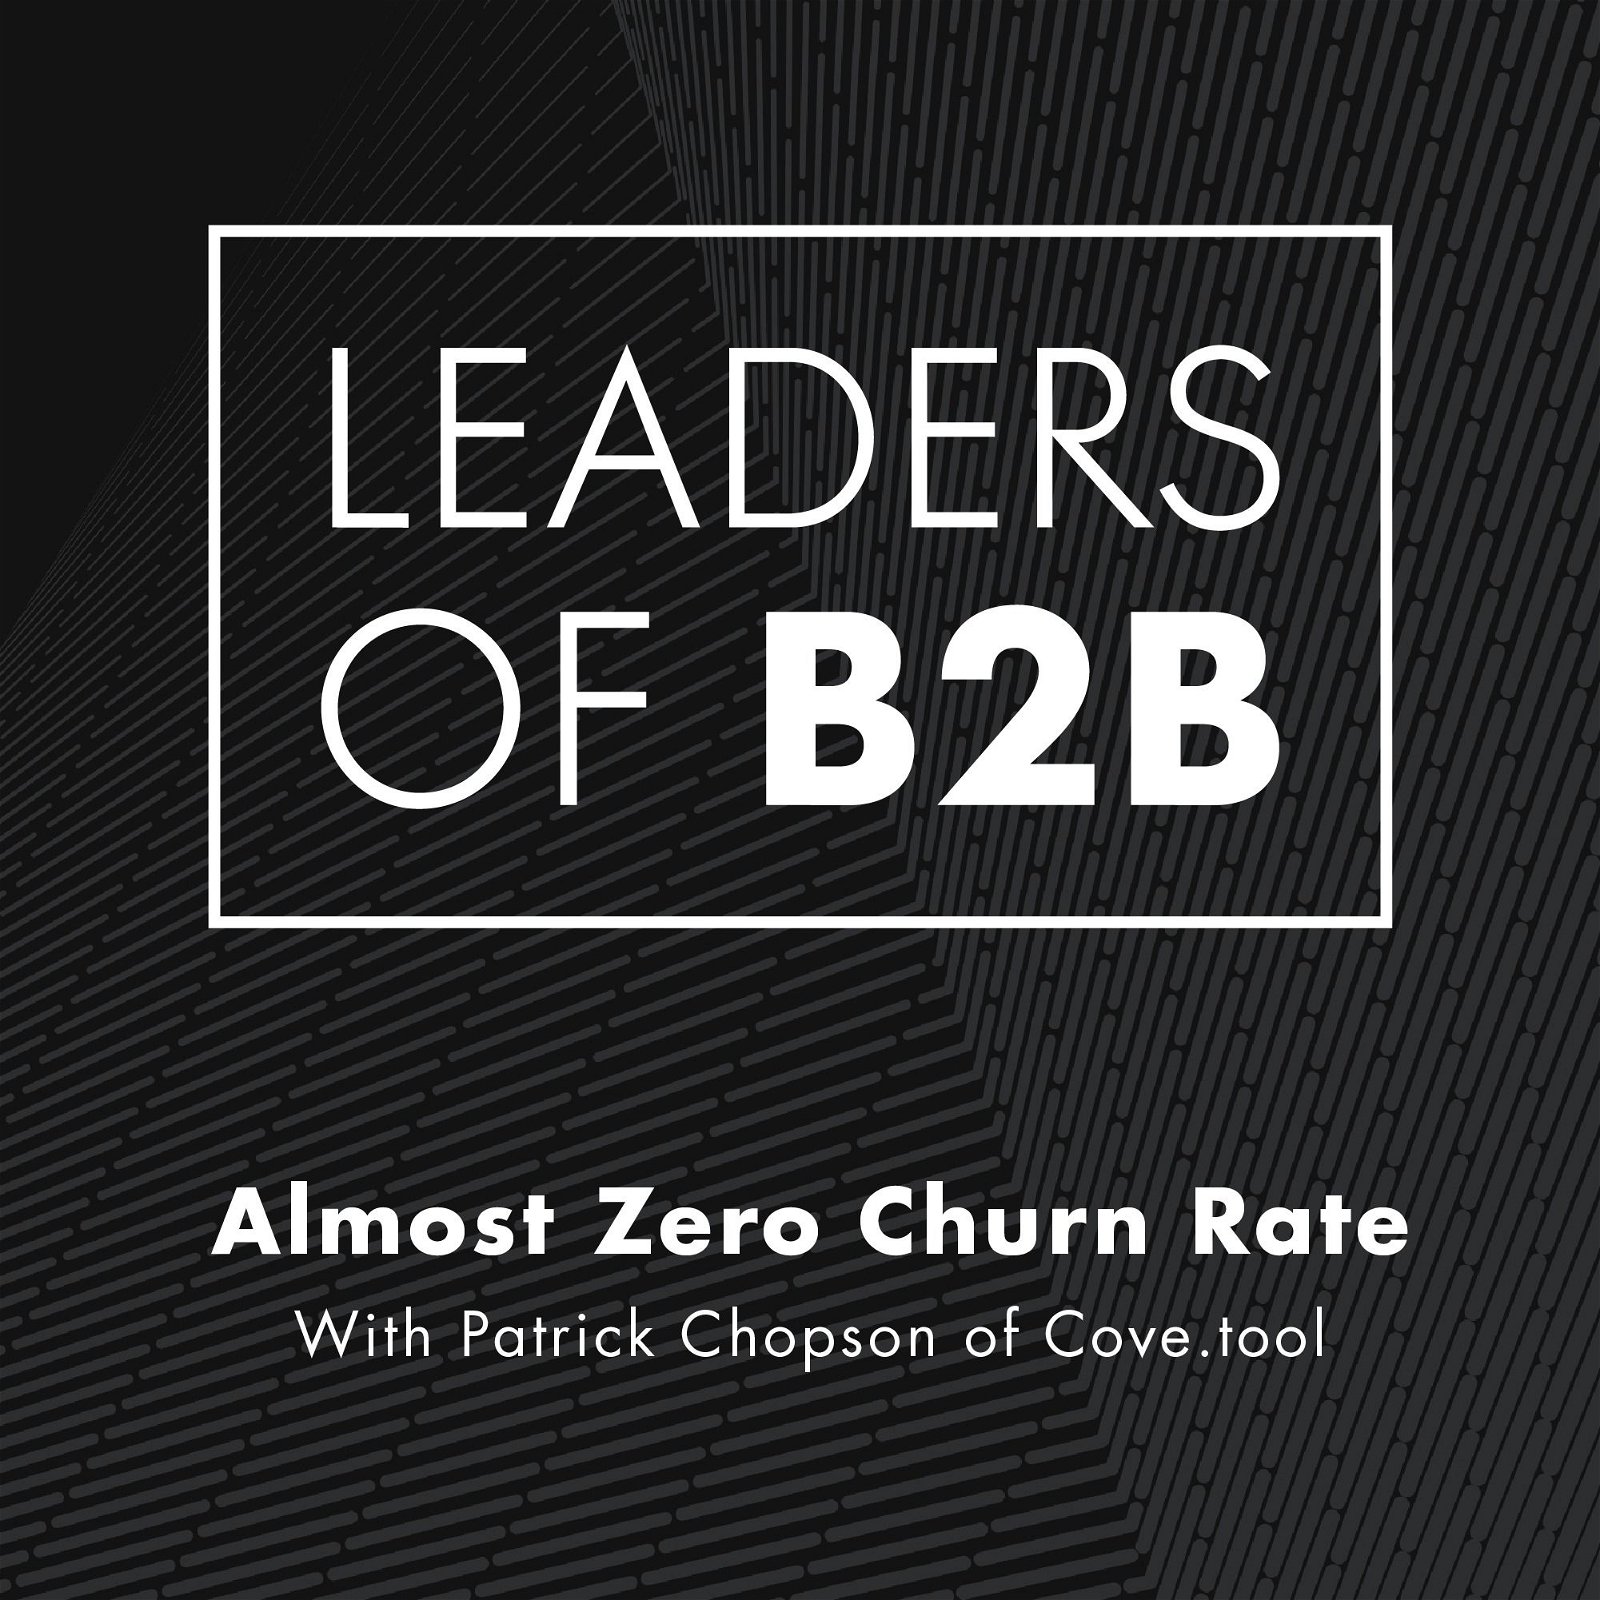 Almost Zero Churn Rate, with Patrick Chopson of Cove.tool